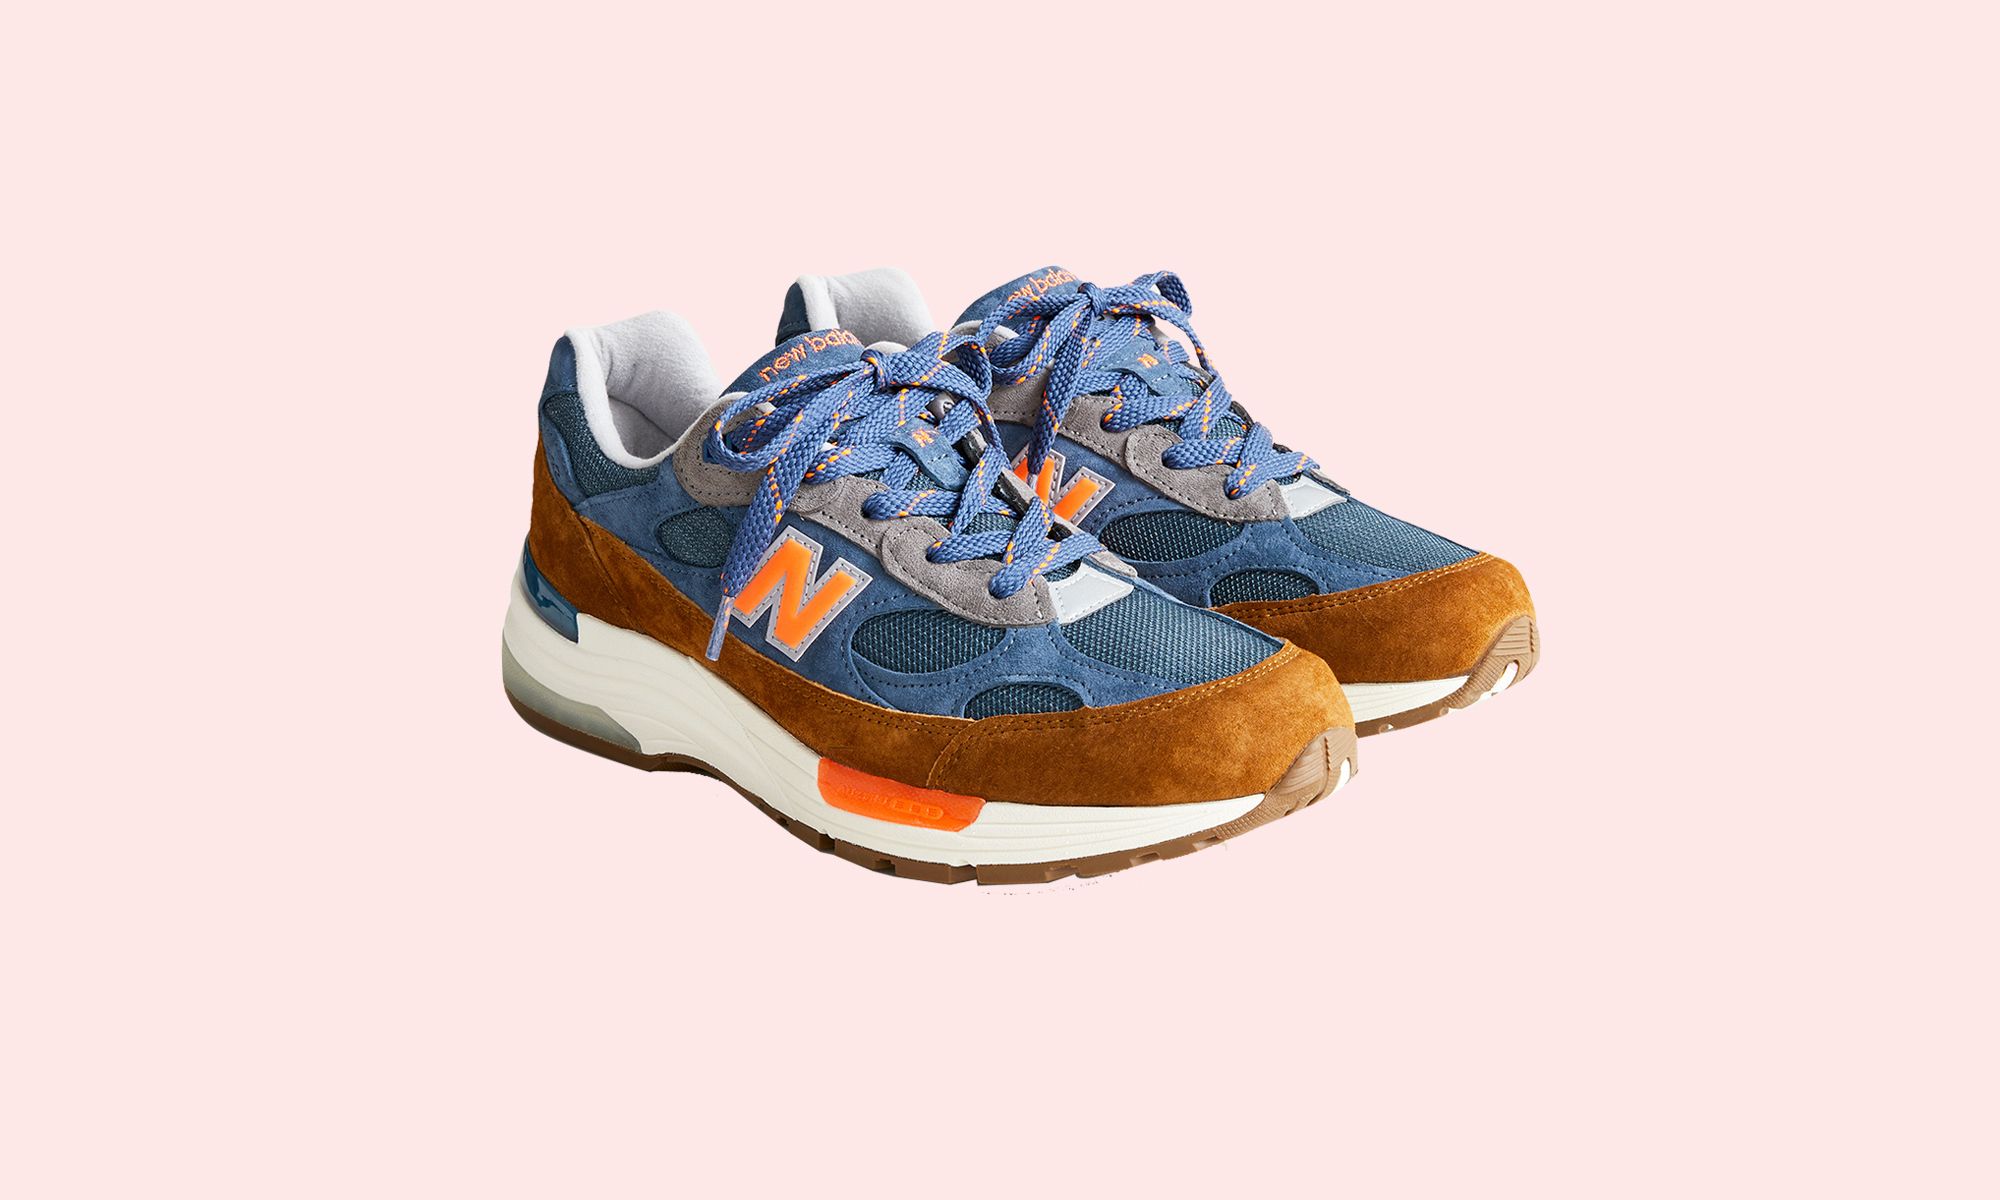 Ace Elasticity Fly kite New Balance x J.Crew 992 'NY' New York Sneakers Release Date, Price, and  Where to Buy